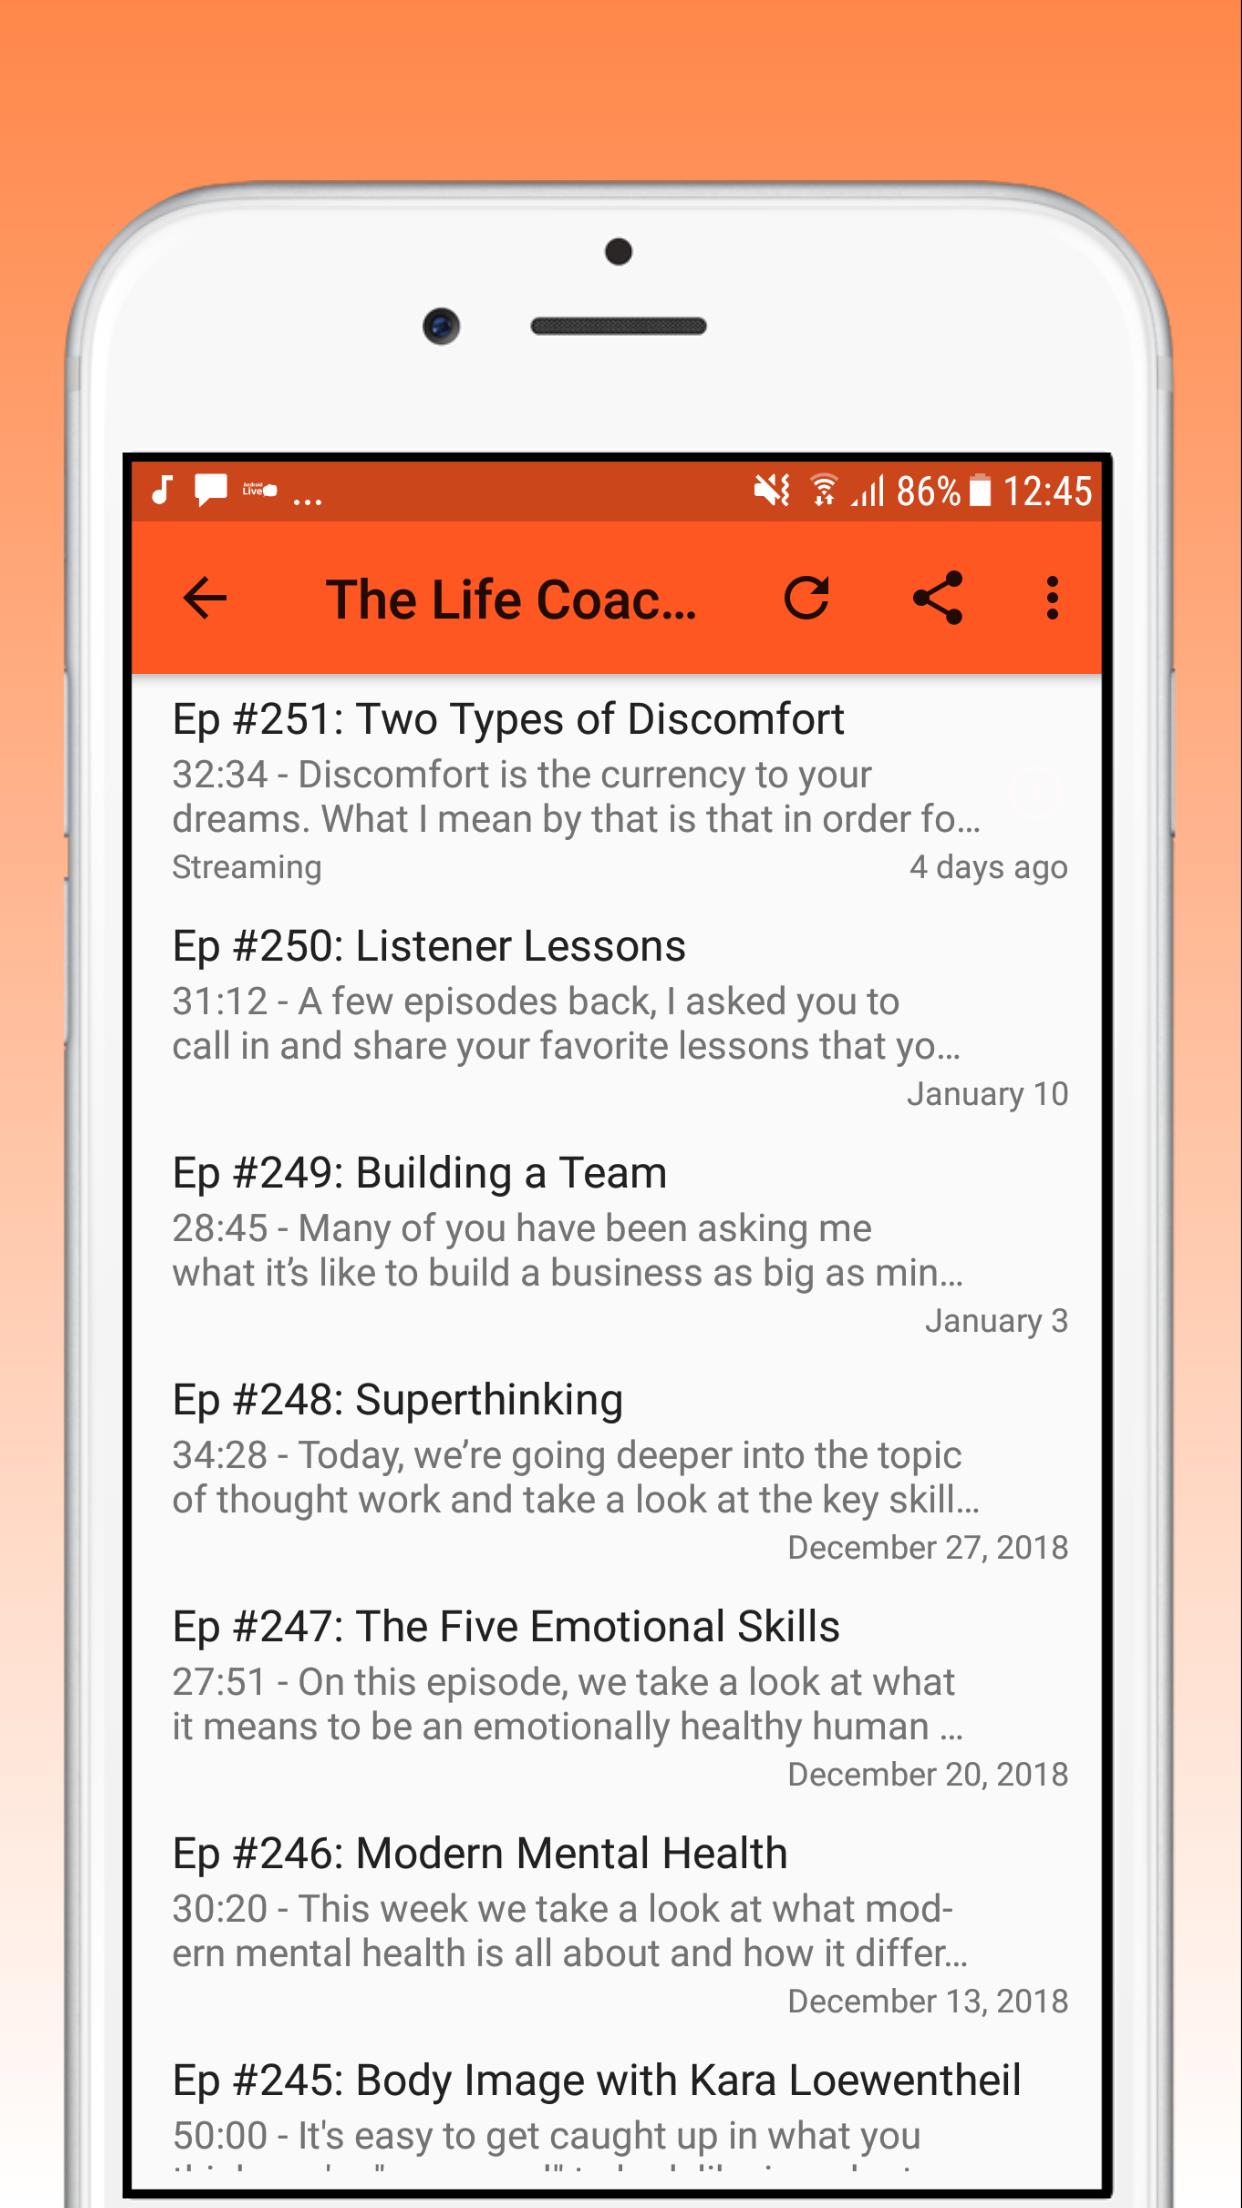 Podcasts : The Life Coach School Podcast for Android - APK Download